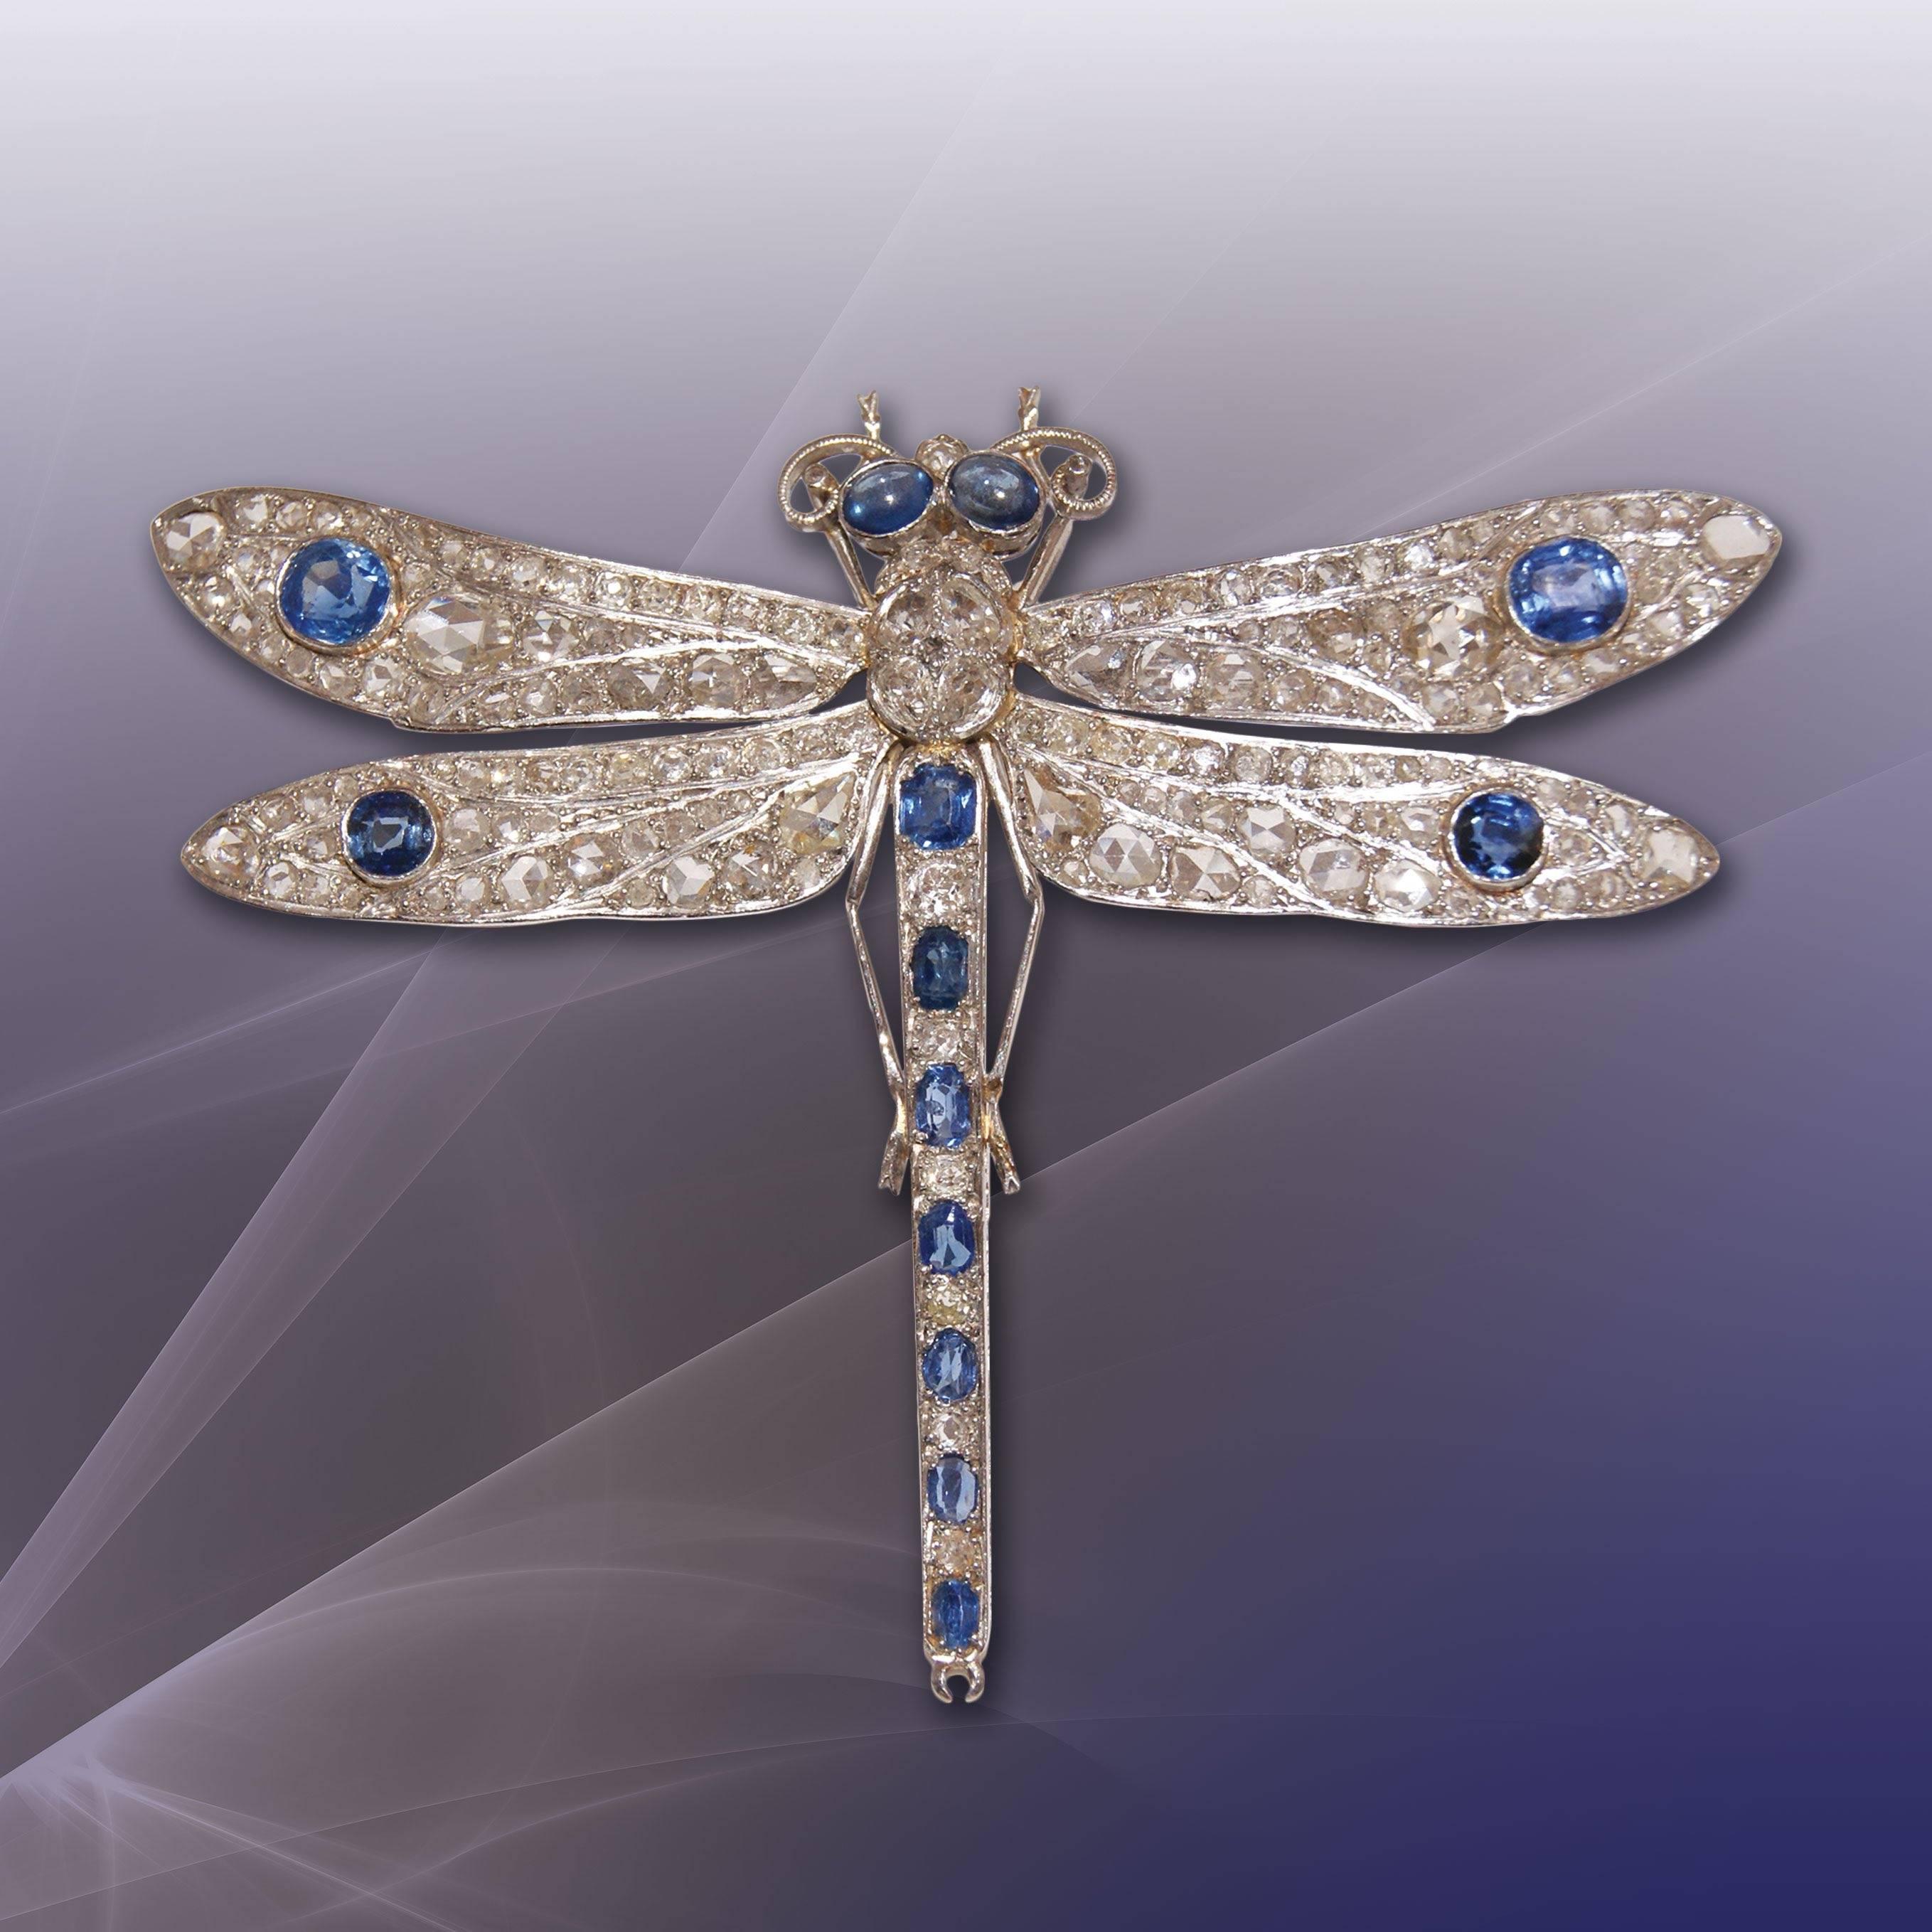 Platinum and white gold dragonfly brooch,entirely set with 